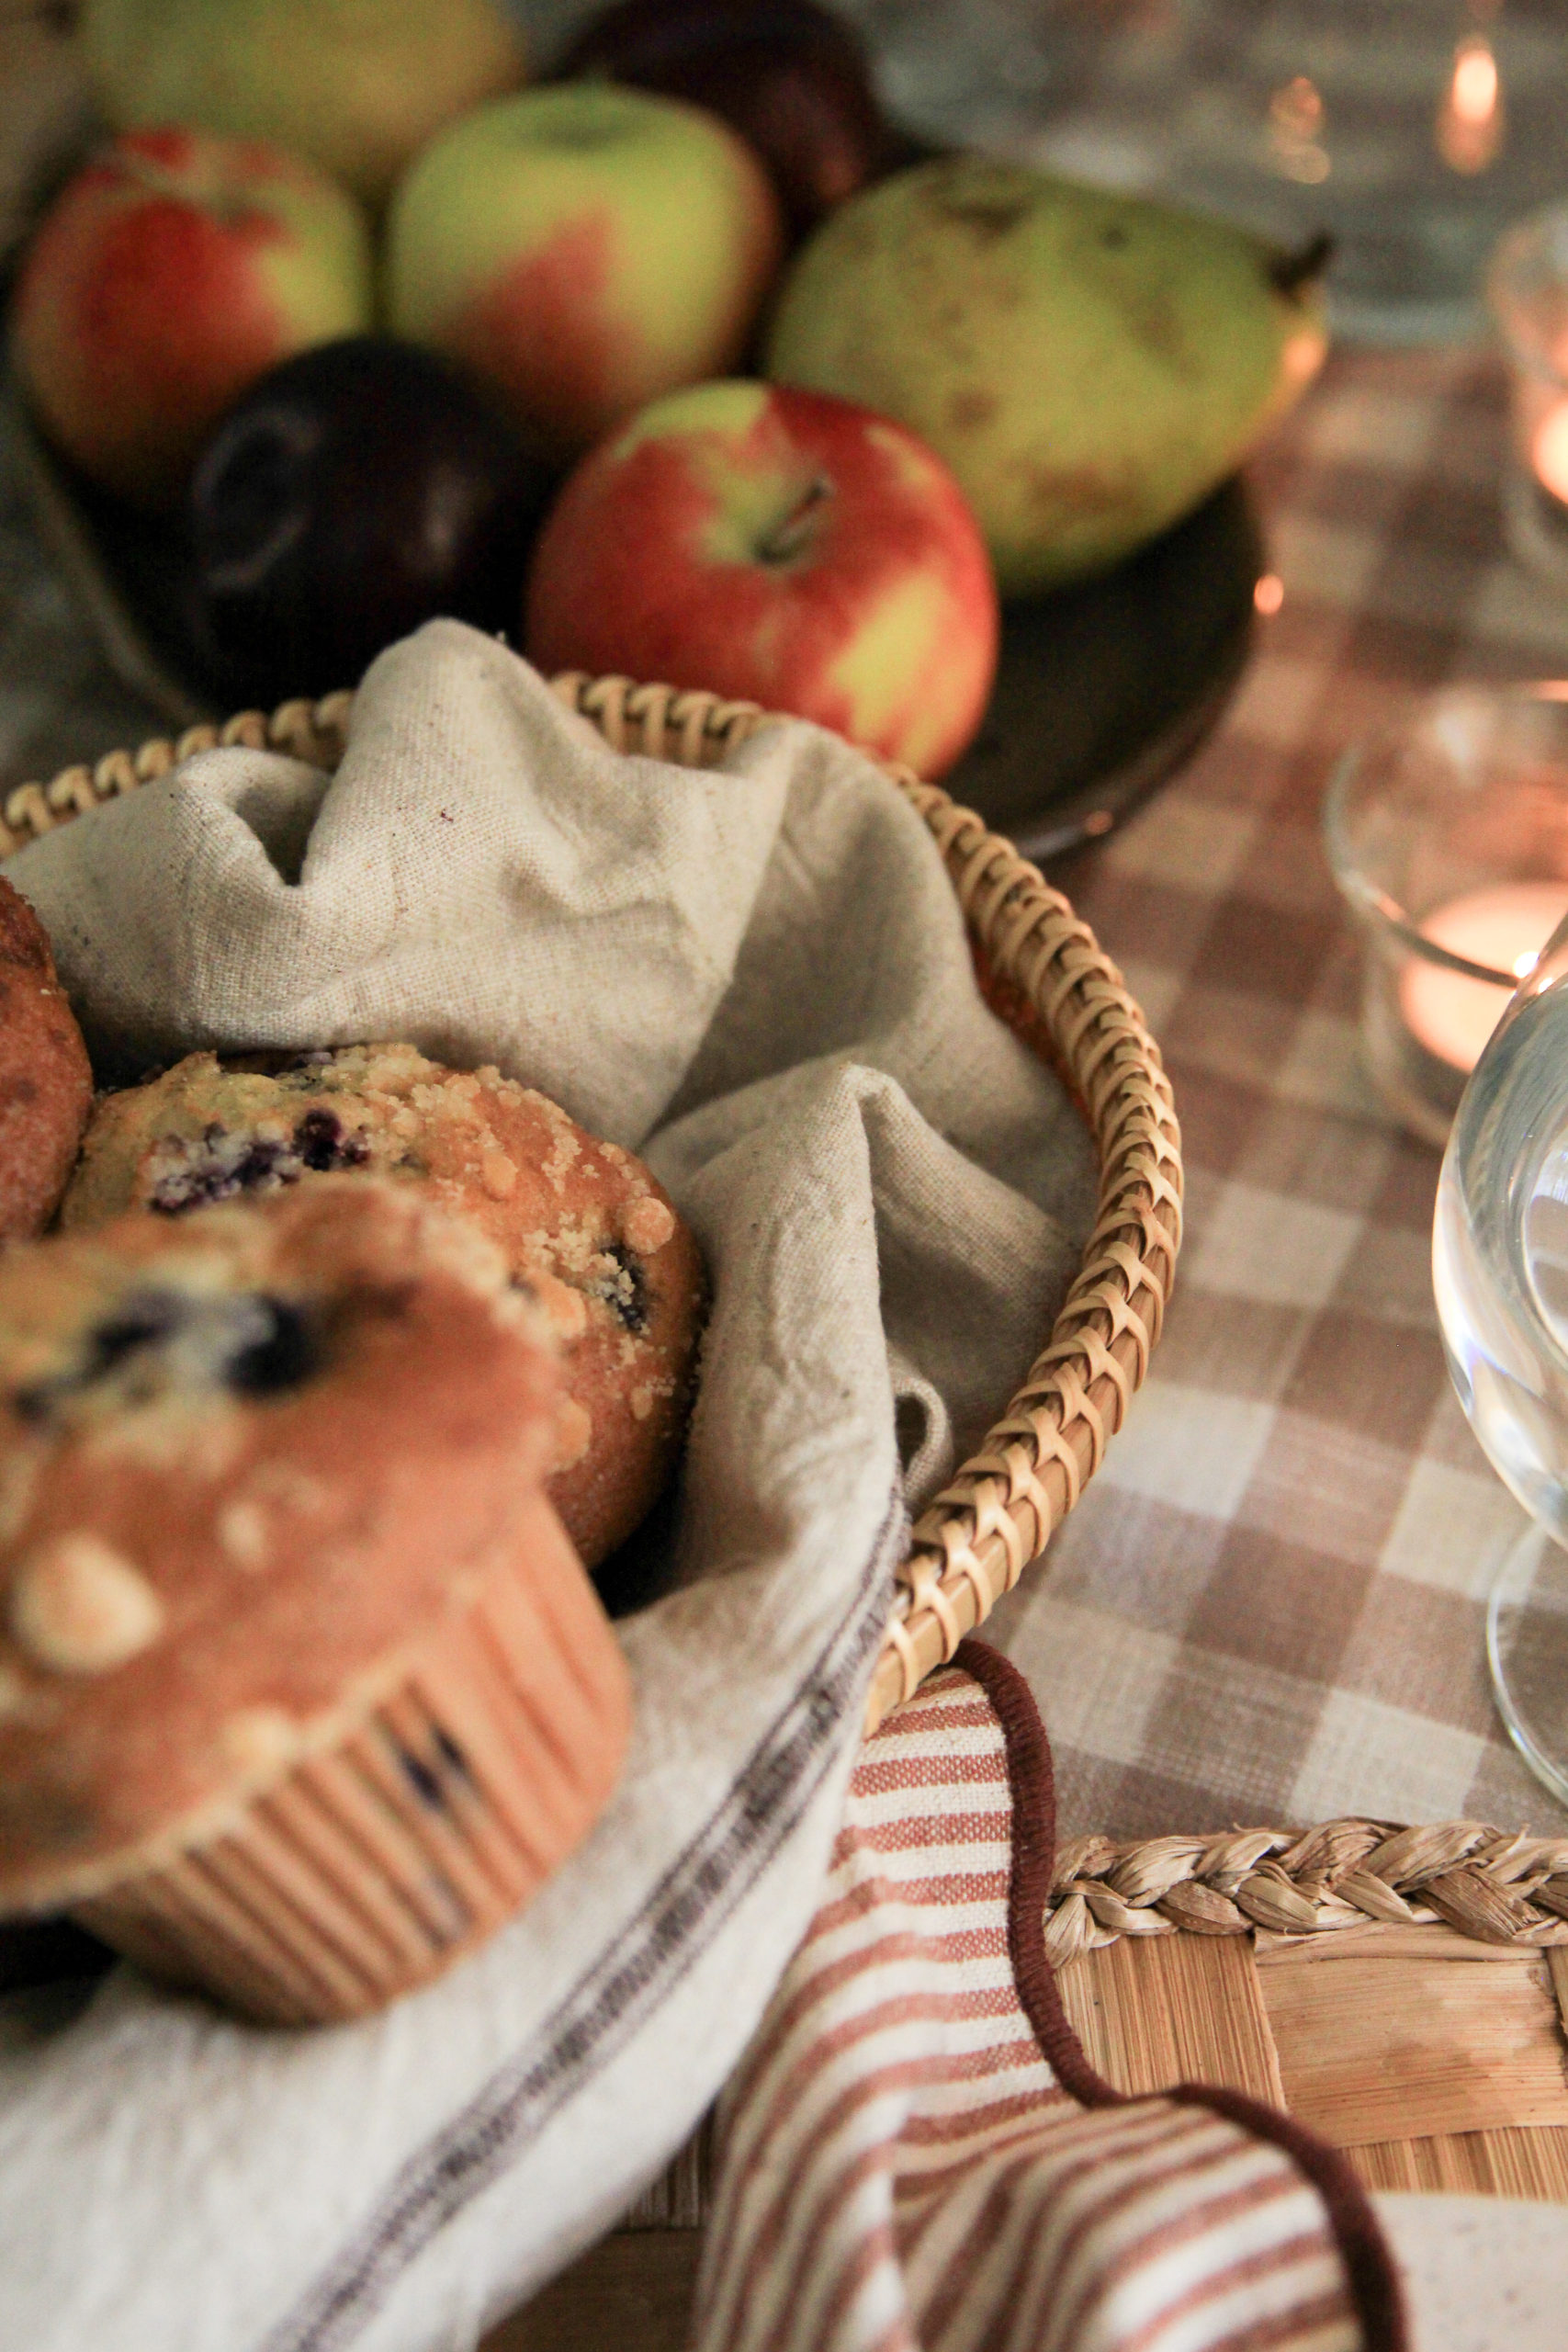 Table setting showcasing a woven basket holding assorted muffins, on a gingham tablecloth. Plate of fruit in background.